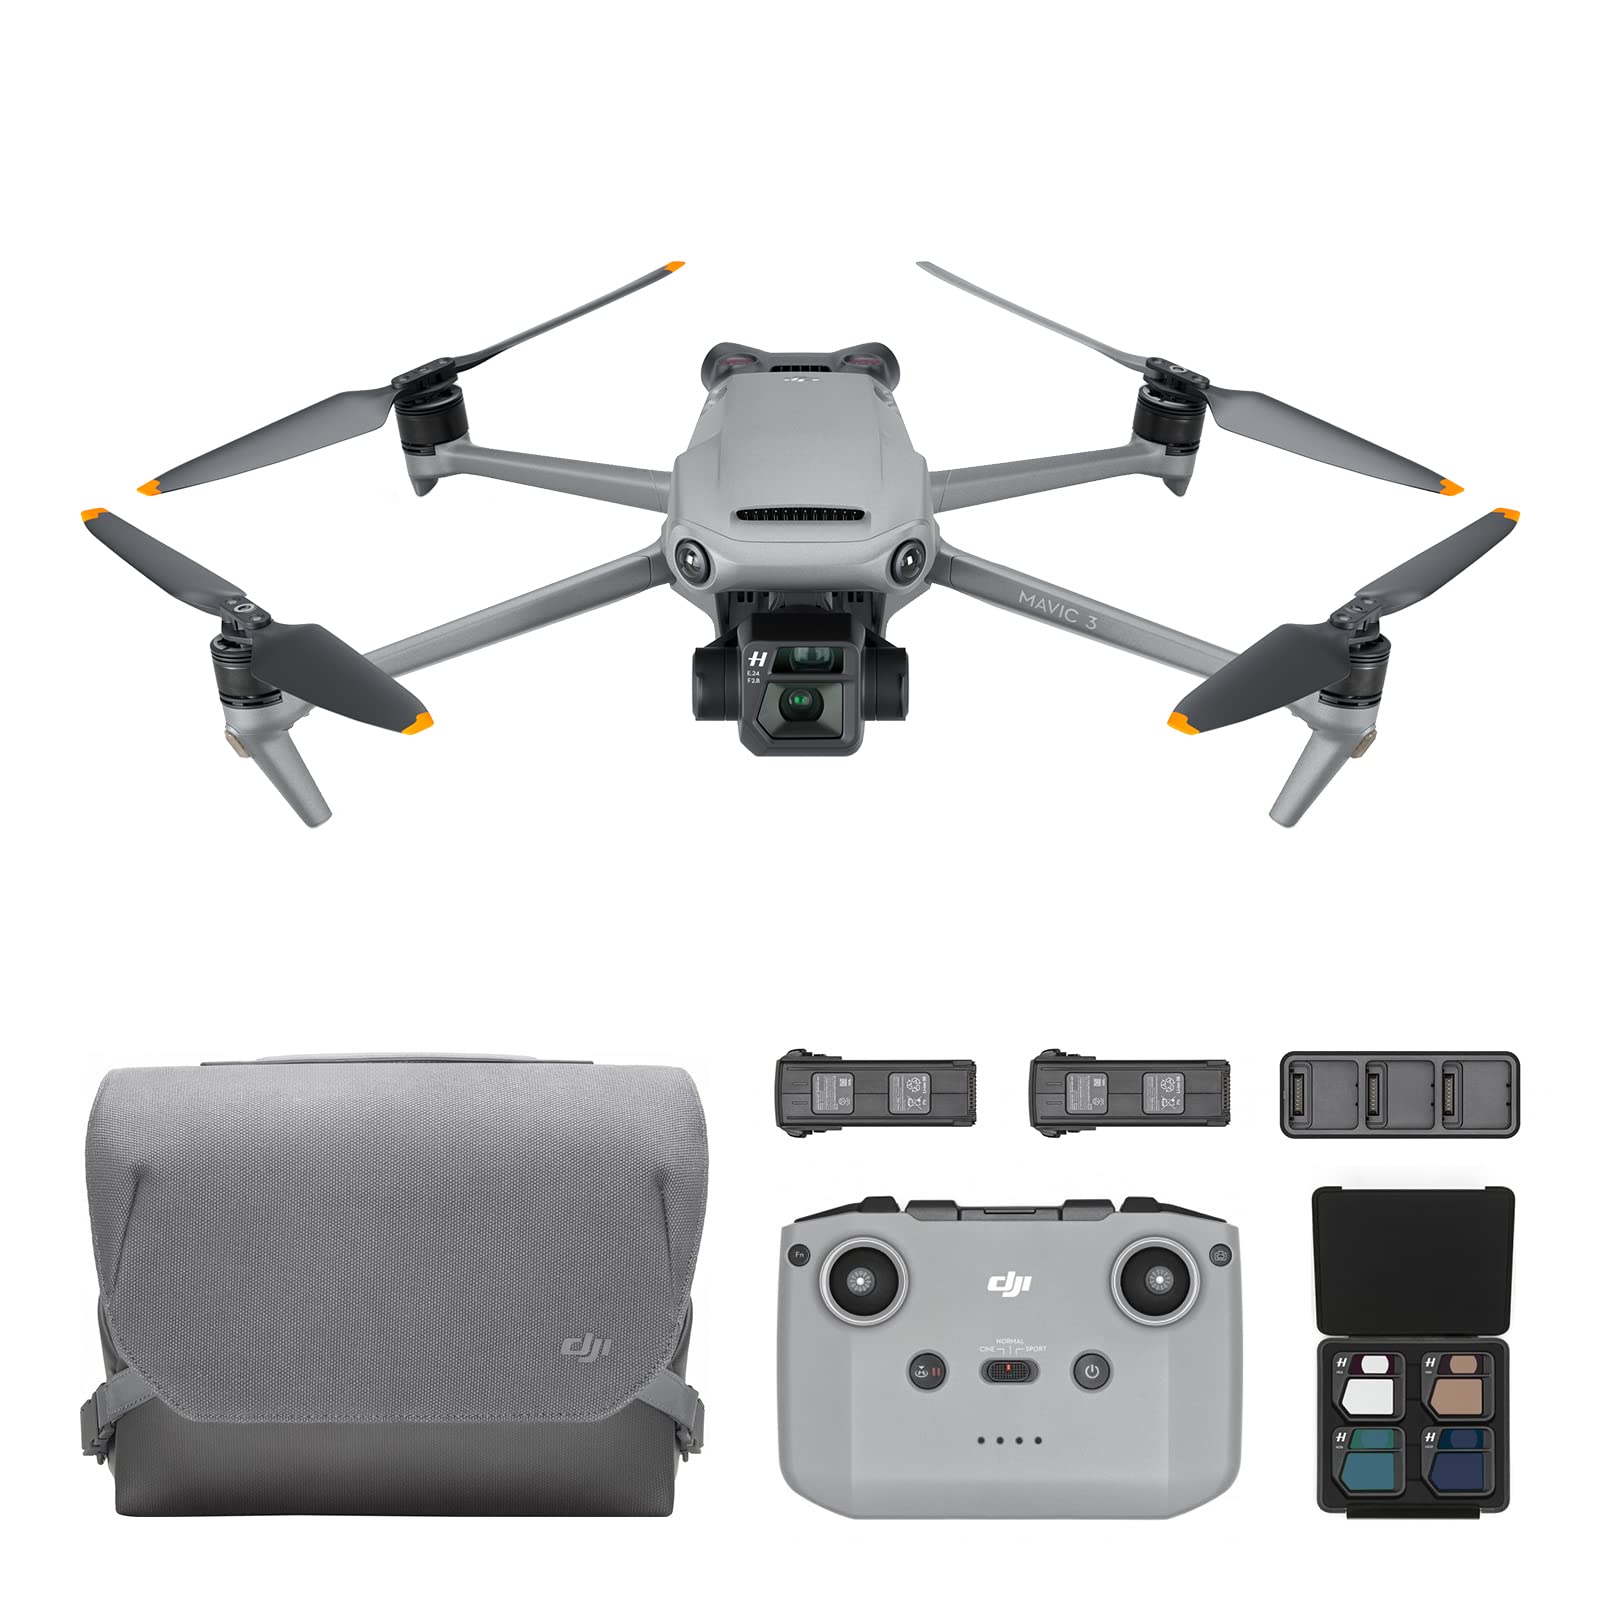 DJI Mavic 3 Fly More Combo, Drone with 4/3 CMOS Hasselblad Camera, 5.1K Video, Omnidirectional Obstacle Sensing, 46 Mins Flight, Advanced Auto Return, 2 Extra Batteries, FAA Remote ID Compliant, Gray